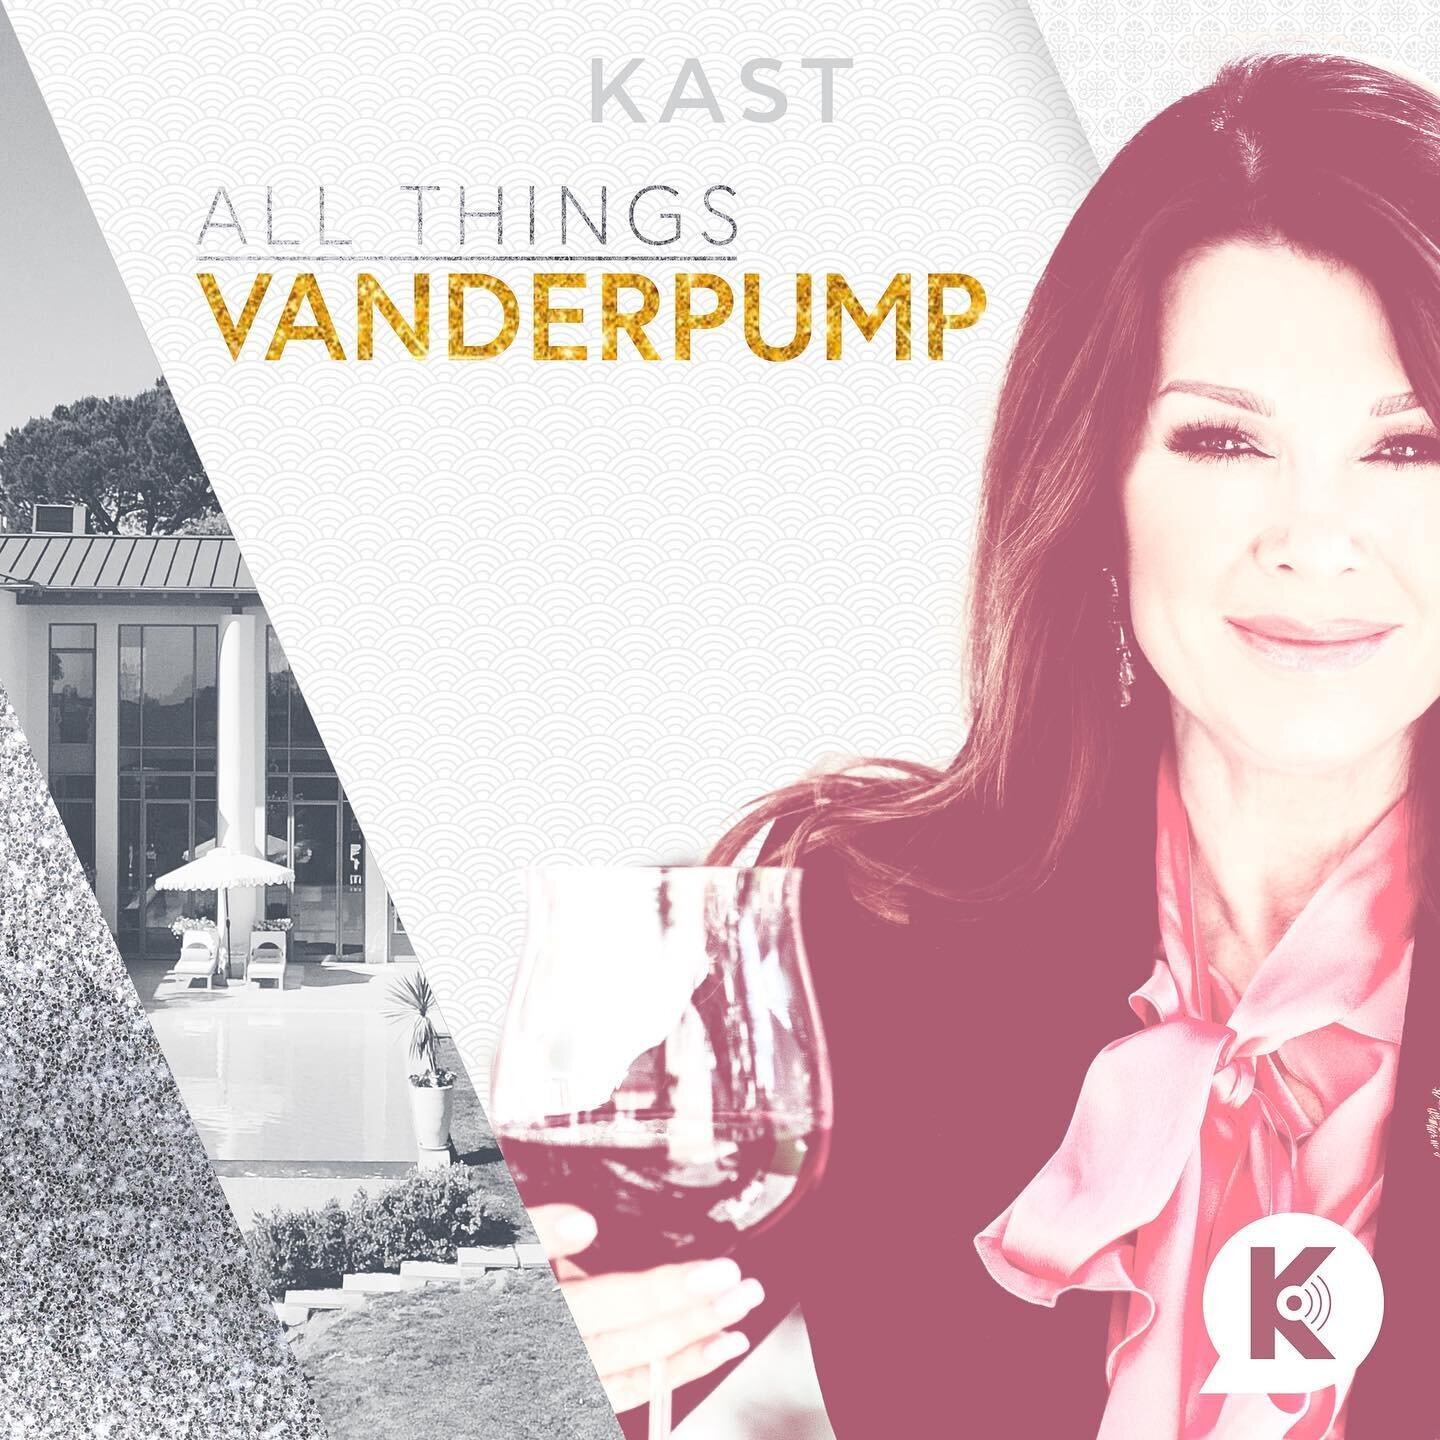 I am very excited about my next 2 episodes of my podcast #AllThingsVanderpump! Dr. Drew will be joining me this week to answer all of your candid sex &amp; relationship questions, as well as a serious discussion on homelessness and mental health. The